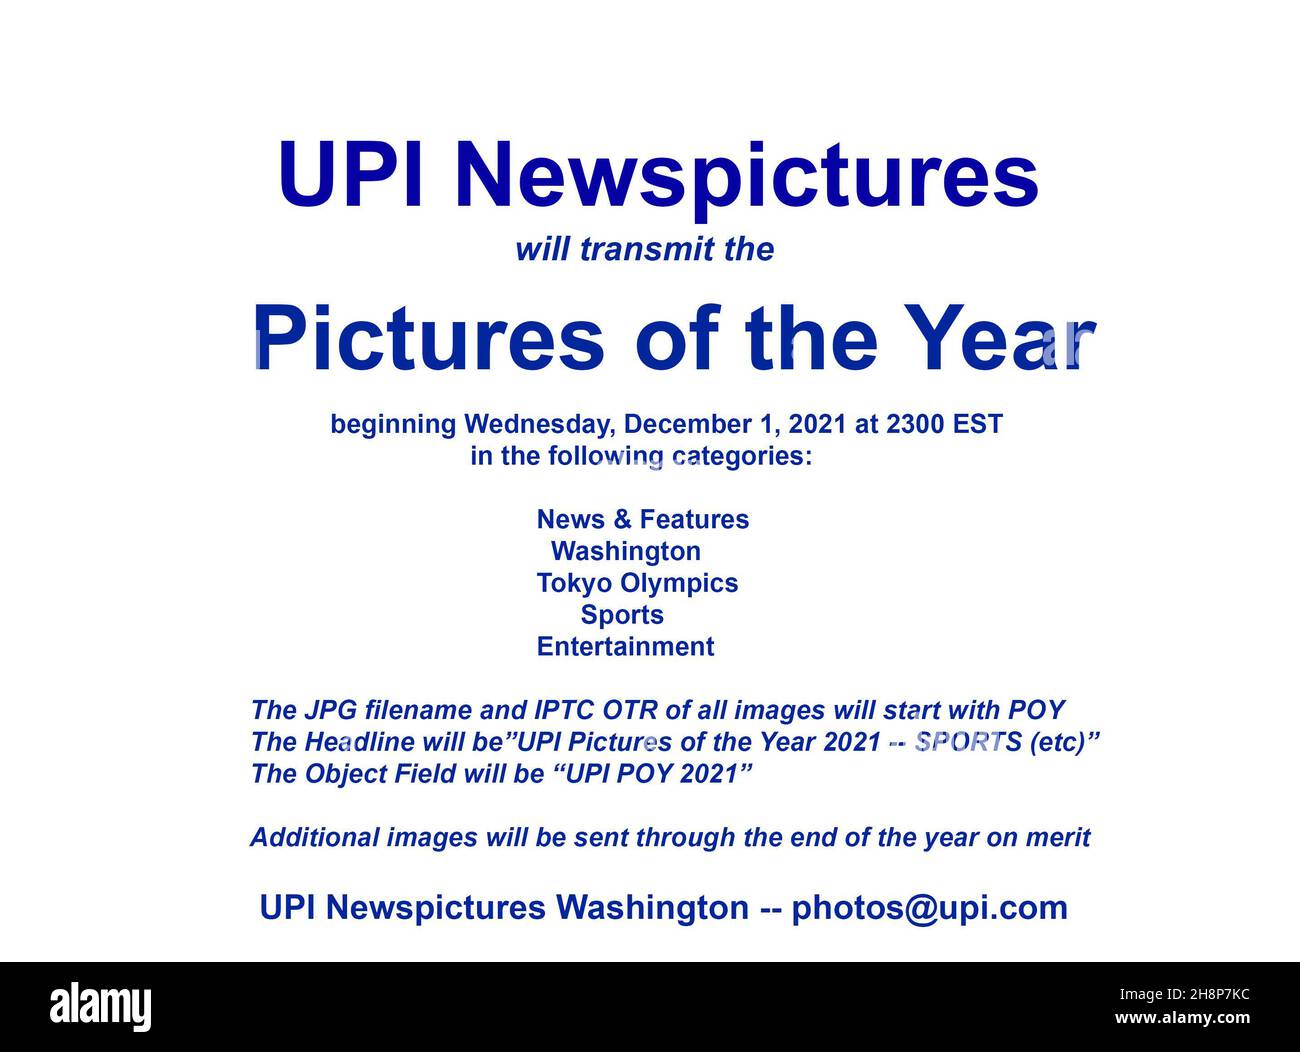 Washington, United States. 01st Dec, 2021. UPI Newspictures will transmit 2021 Pictures of the Year on Wednesday, December 1, 2017, at approximately 2300 EST (0400GMT, Dec 2nd) in the following categories: News & Features, Washington, Tokyo Olympics, Sports, and Entertainment. The JPG filename and IPTC OTR of all images will start with POY. The Headline will be 'UPI Pictures of the Year 2021 - Sports (and so on). The Object Field will be 'UPI POY 2021'. Additional POY images will be transmitted through the end of the year on merit. Credit: UPI/Alamy Live News Stock Photo